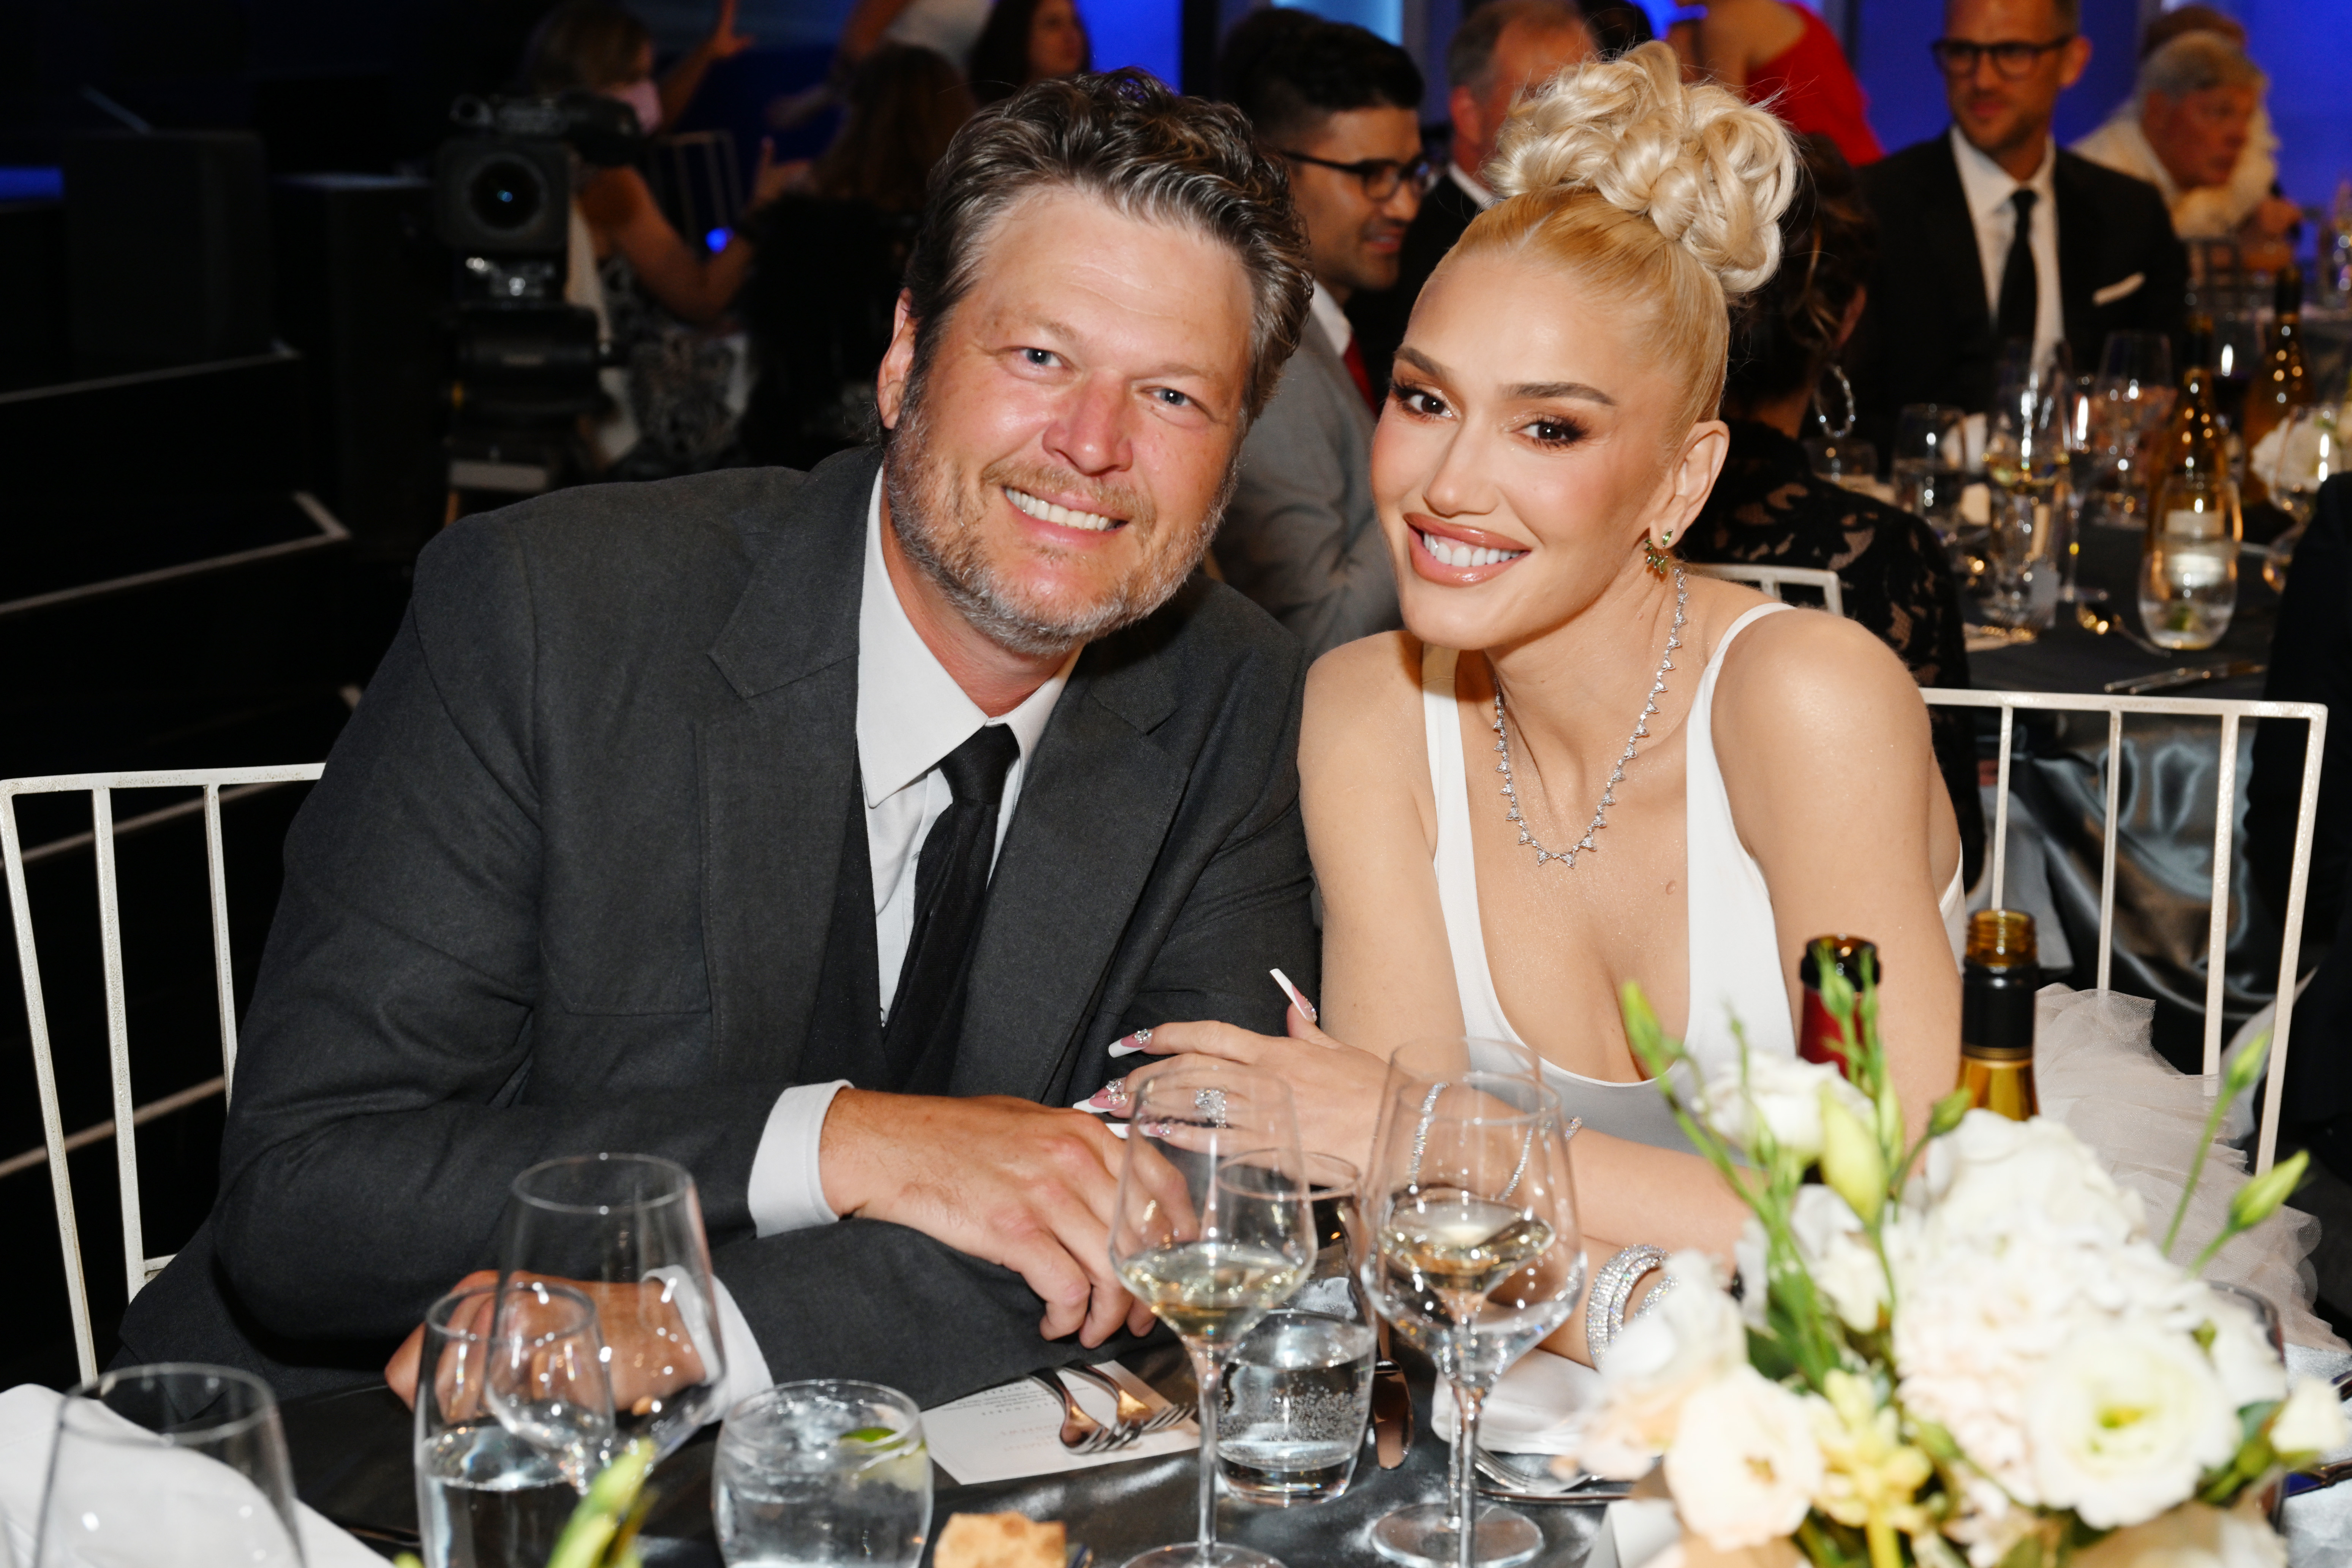 Blake and Gwen tied the knot in July 2021 after six years together